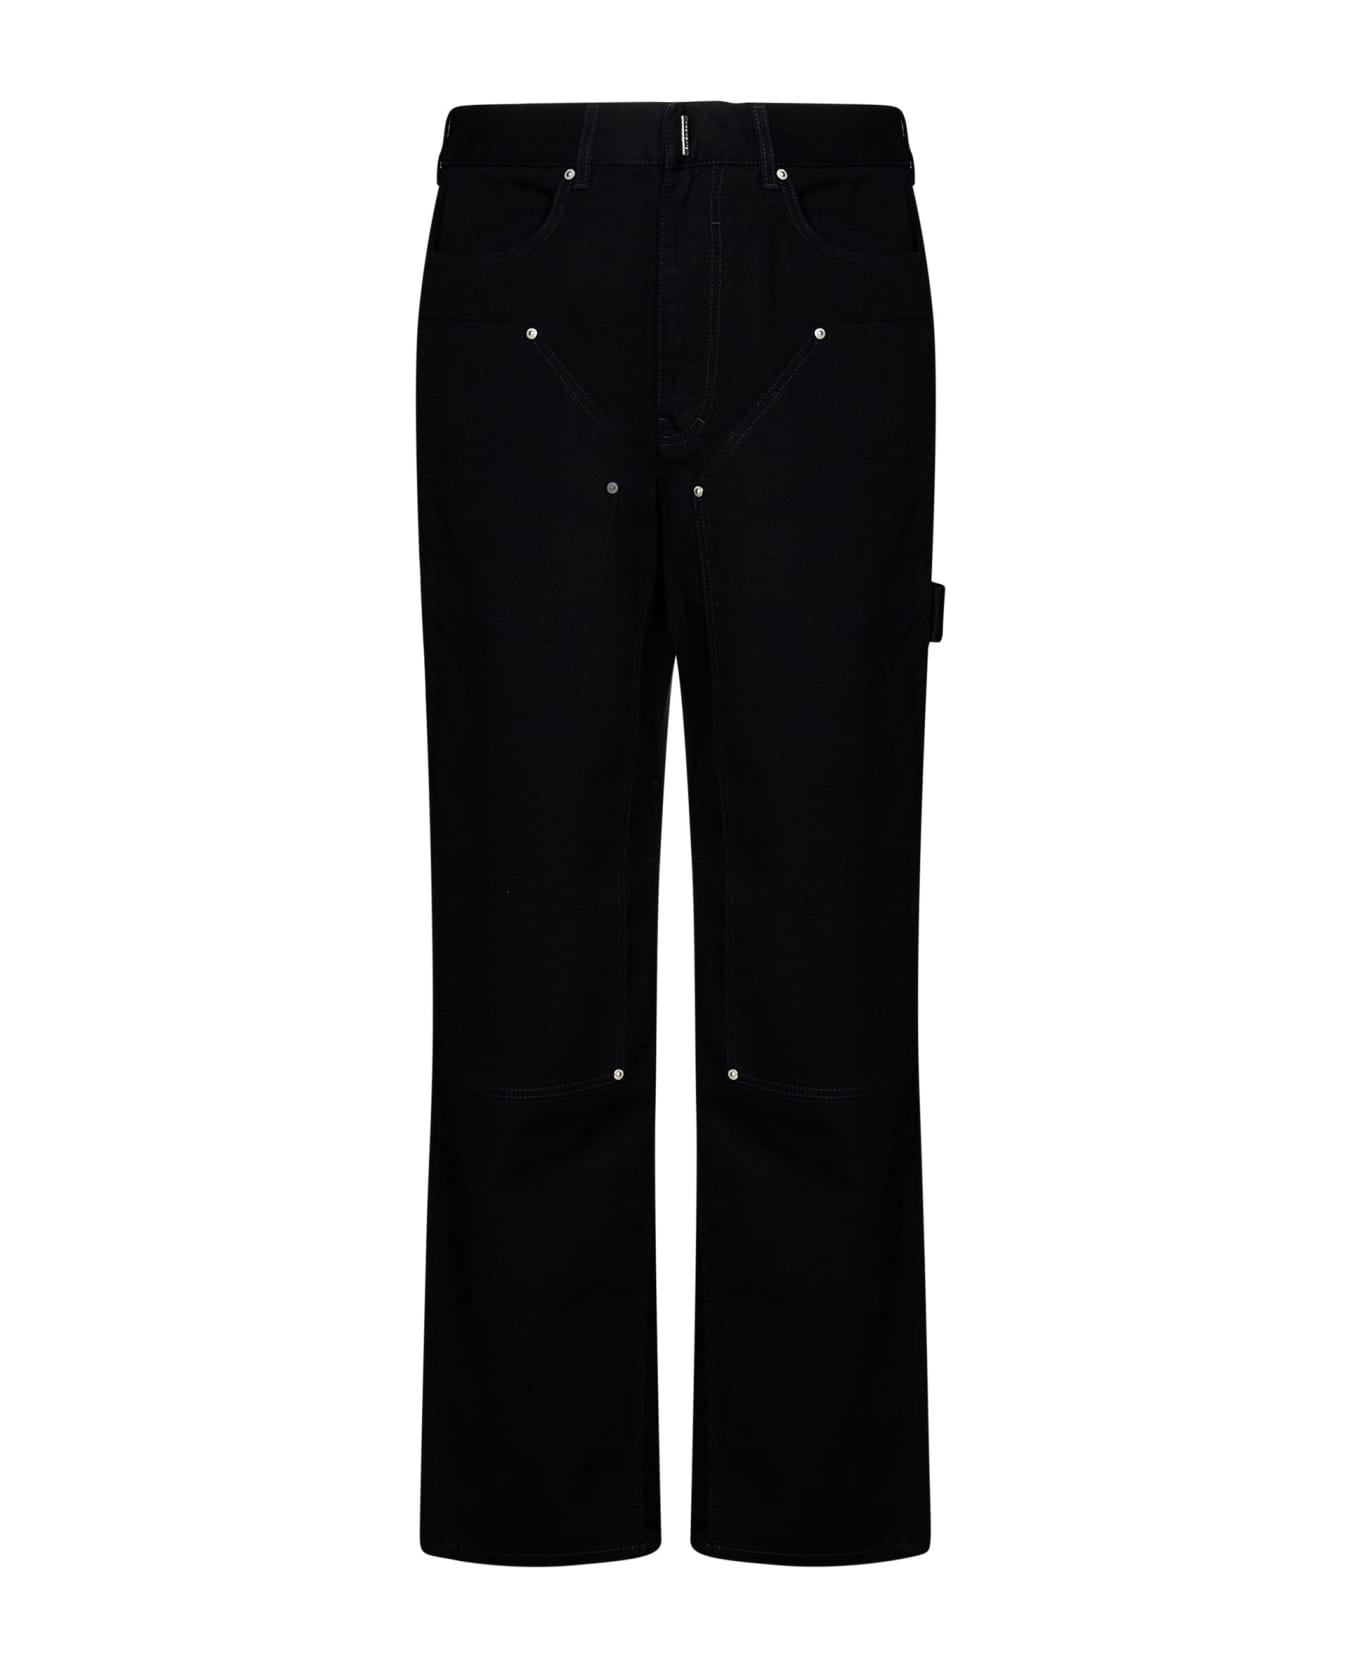 Givenchy Trousers - Black ボトムス